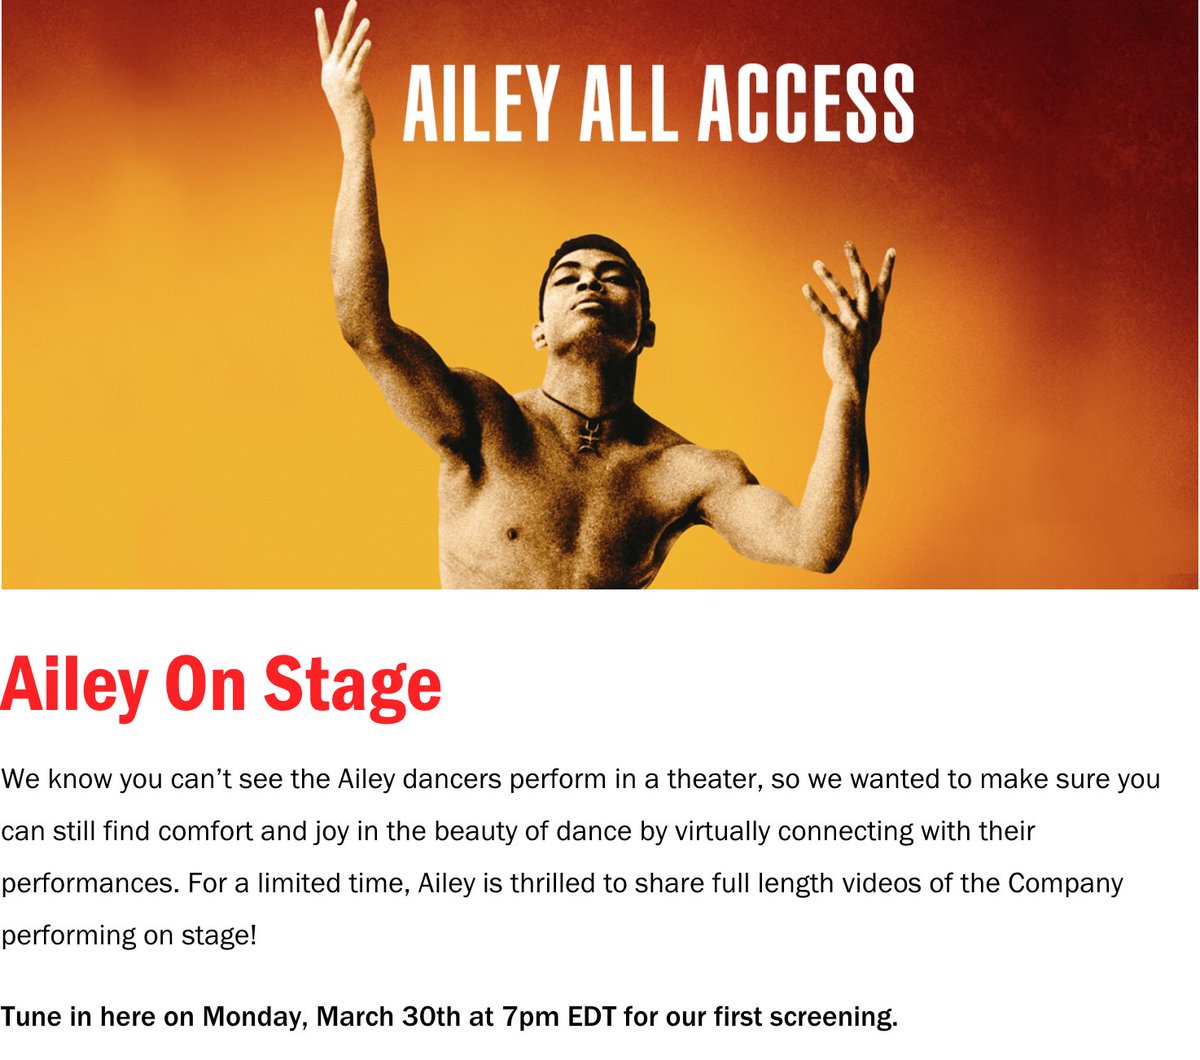  #TheShowMustGoOn! The Alvin Ailey American Dance Theater is bringing performances to the audience online. Check out Ailey All Access Monday, March 30th at 7pm EDT for the first screening.  https://www.alvinailey.org/ailey-all-access  #TheArts  #AileyAllAccess  #alvinailey  #danceathome  #Coronavirus